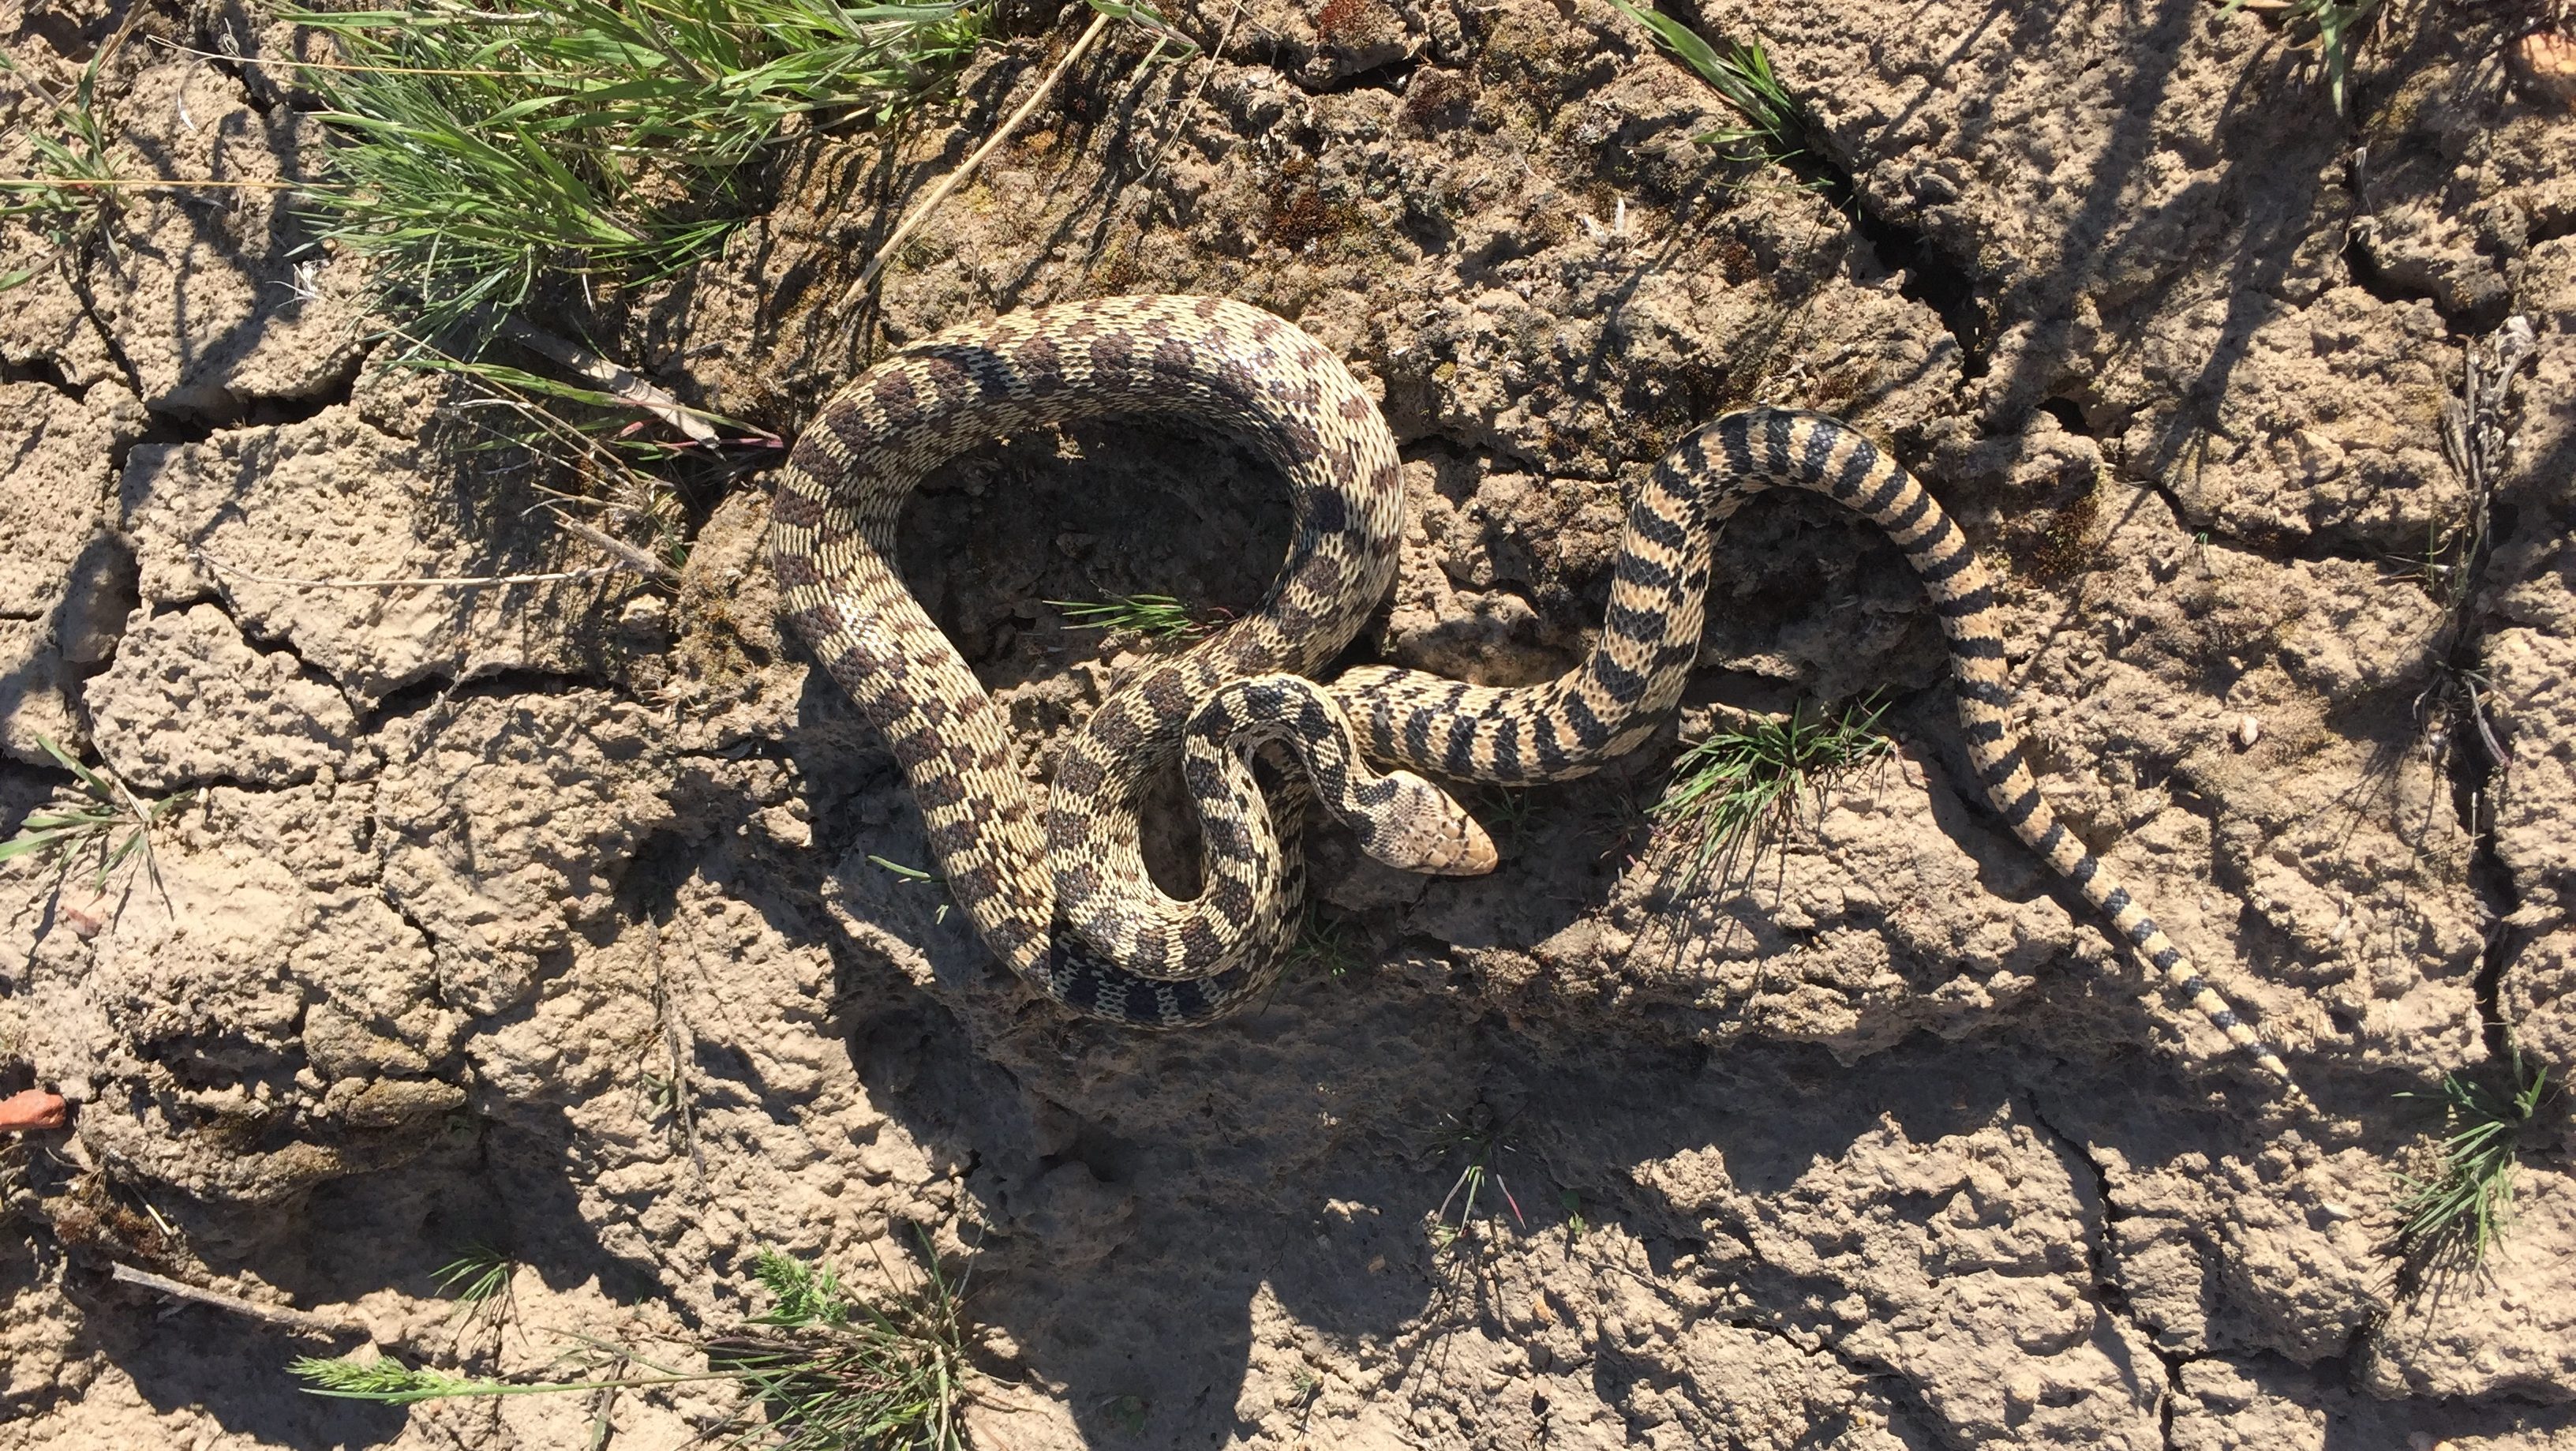 a gopher snake on the ground